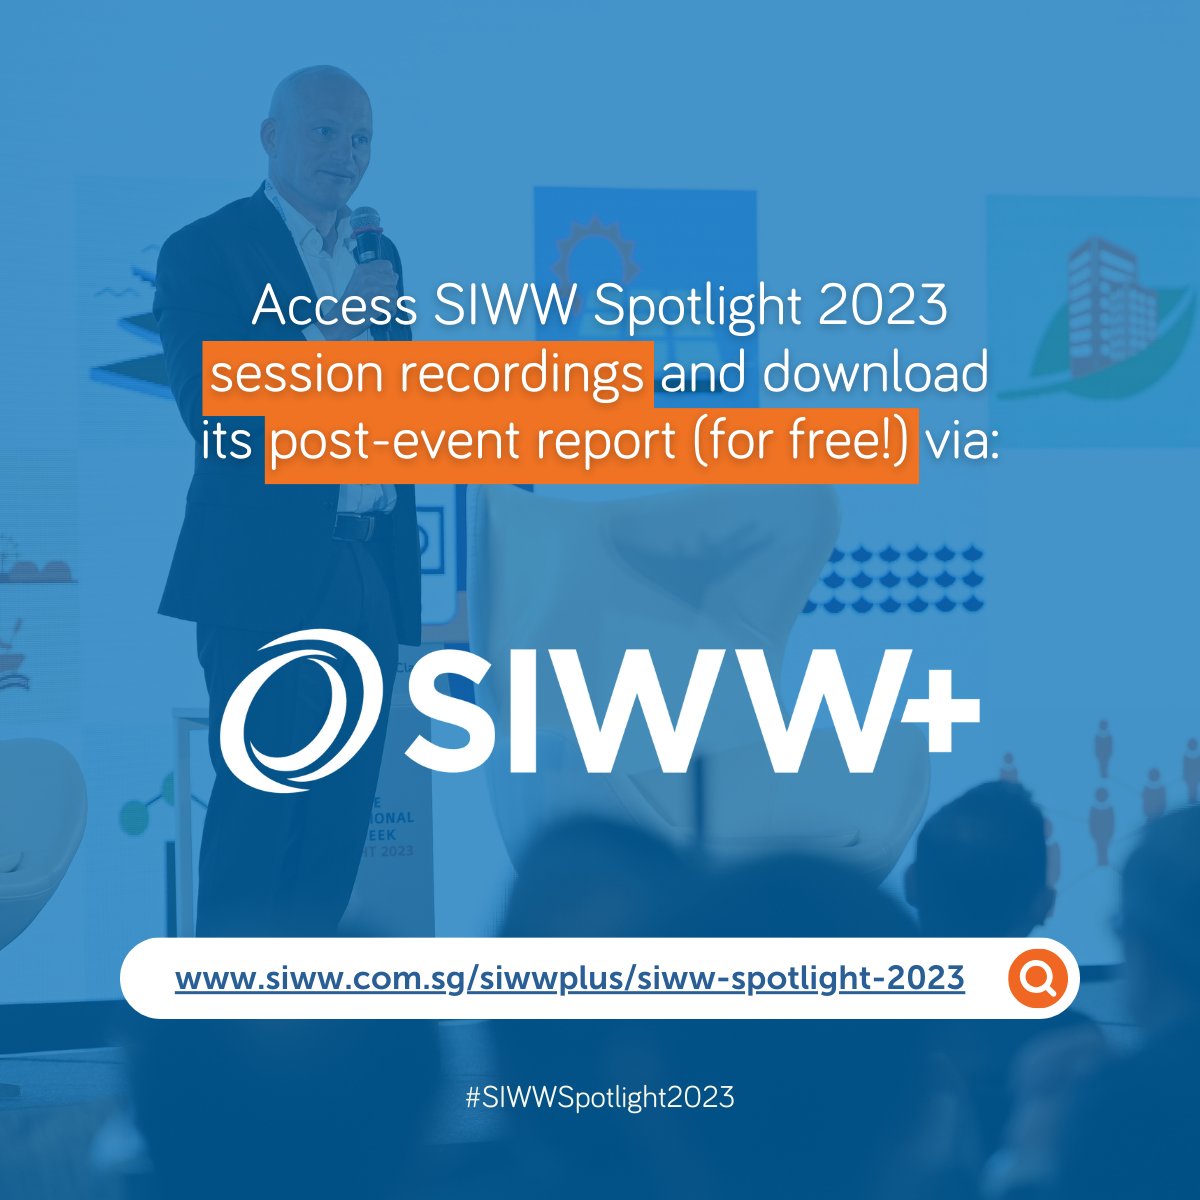 How can utilities and the private sector work together to re-envision wastewater treatment and resource recovery? 5 key take-home messages from a 20-year spinning case study shared by @dcwater and @AECOM at #SIWWSpotlight2023. More in the post-event report bit.ly/3PNbZkL